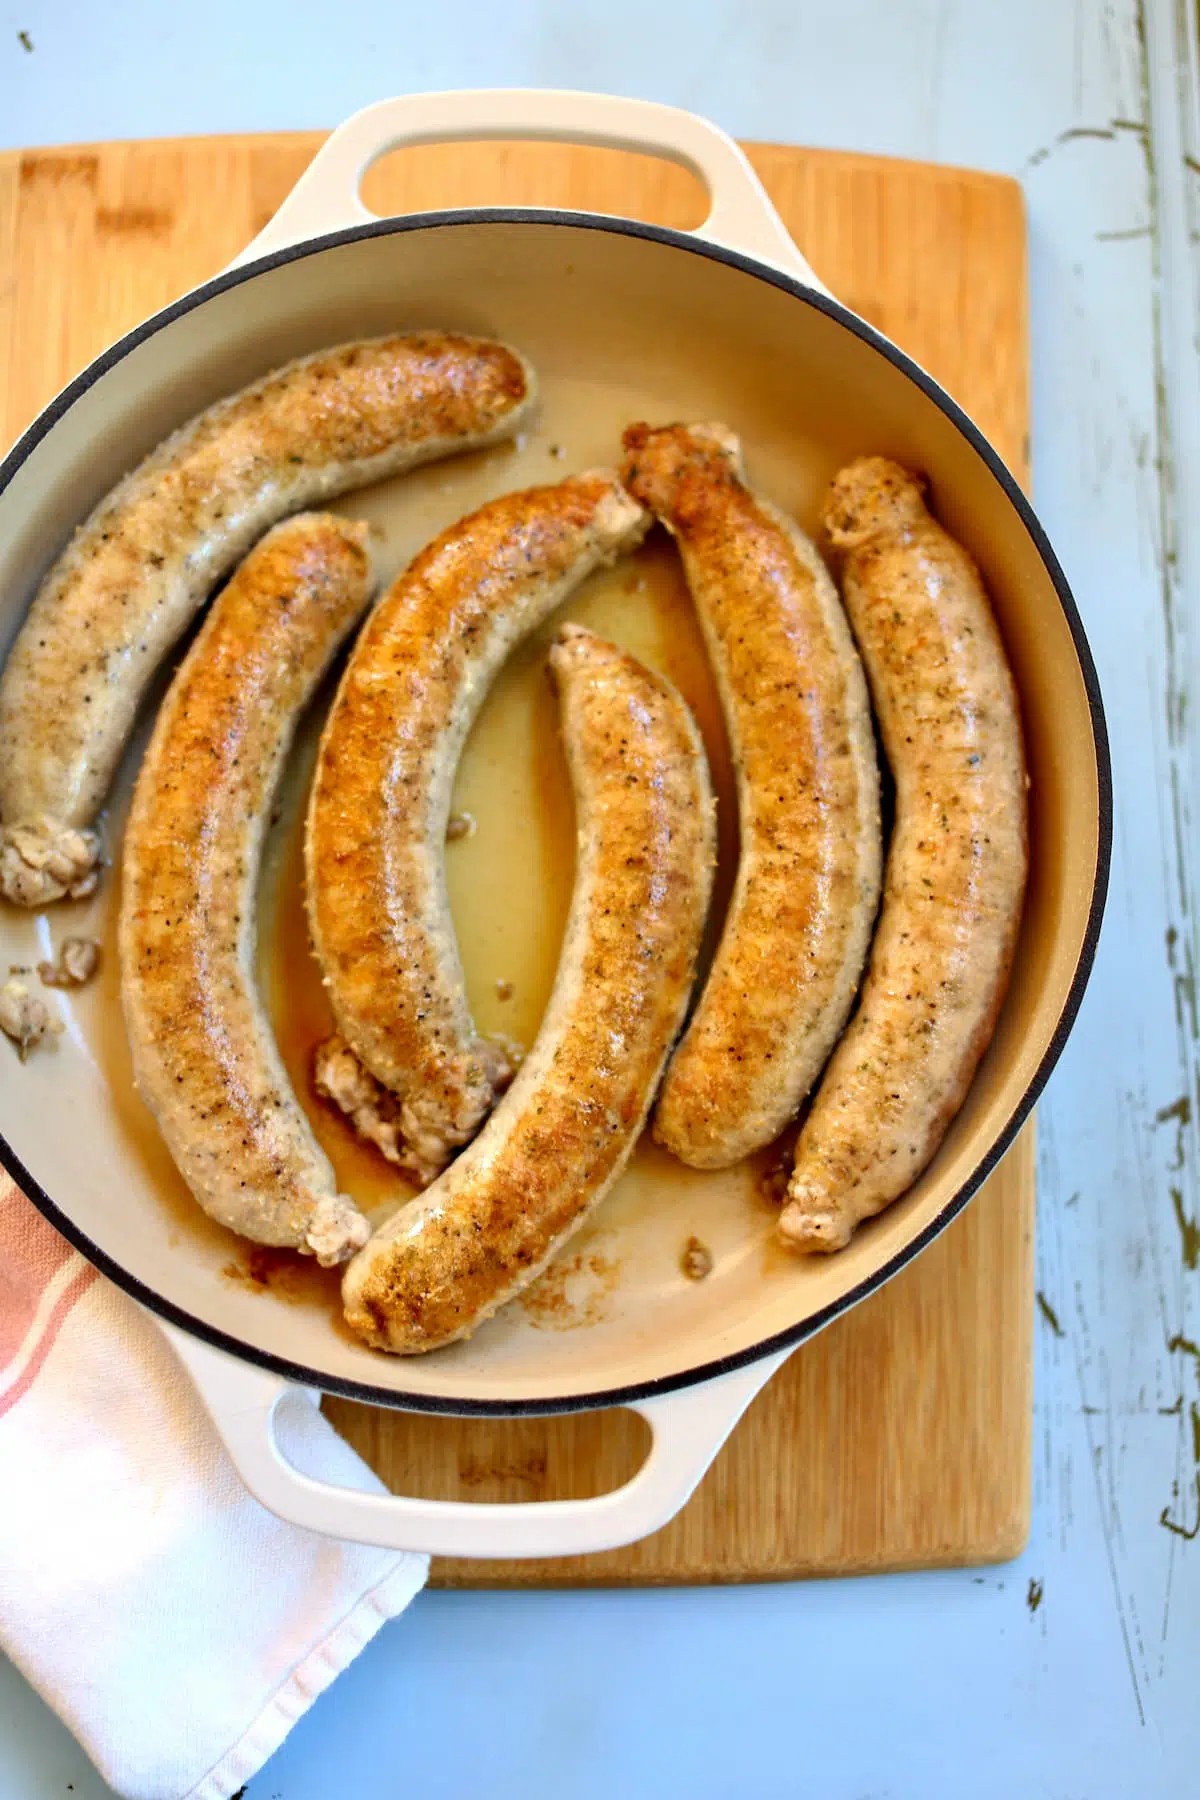 sausages getting browned in a skillet, on a blue table